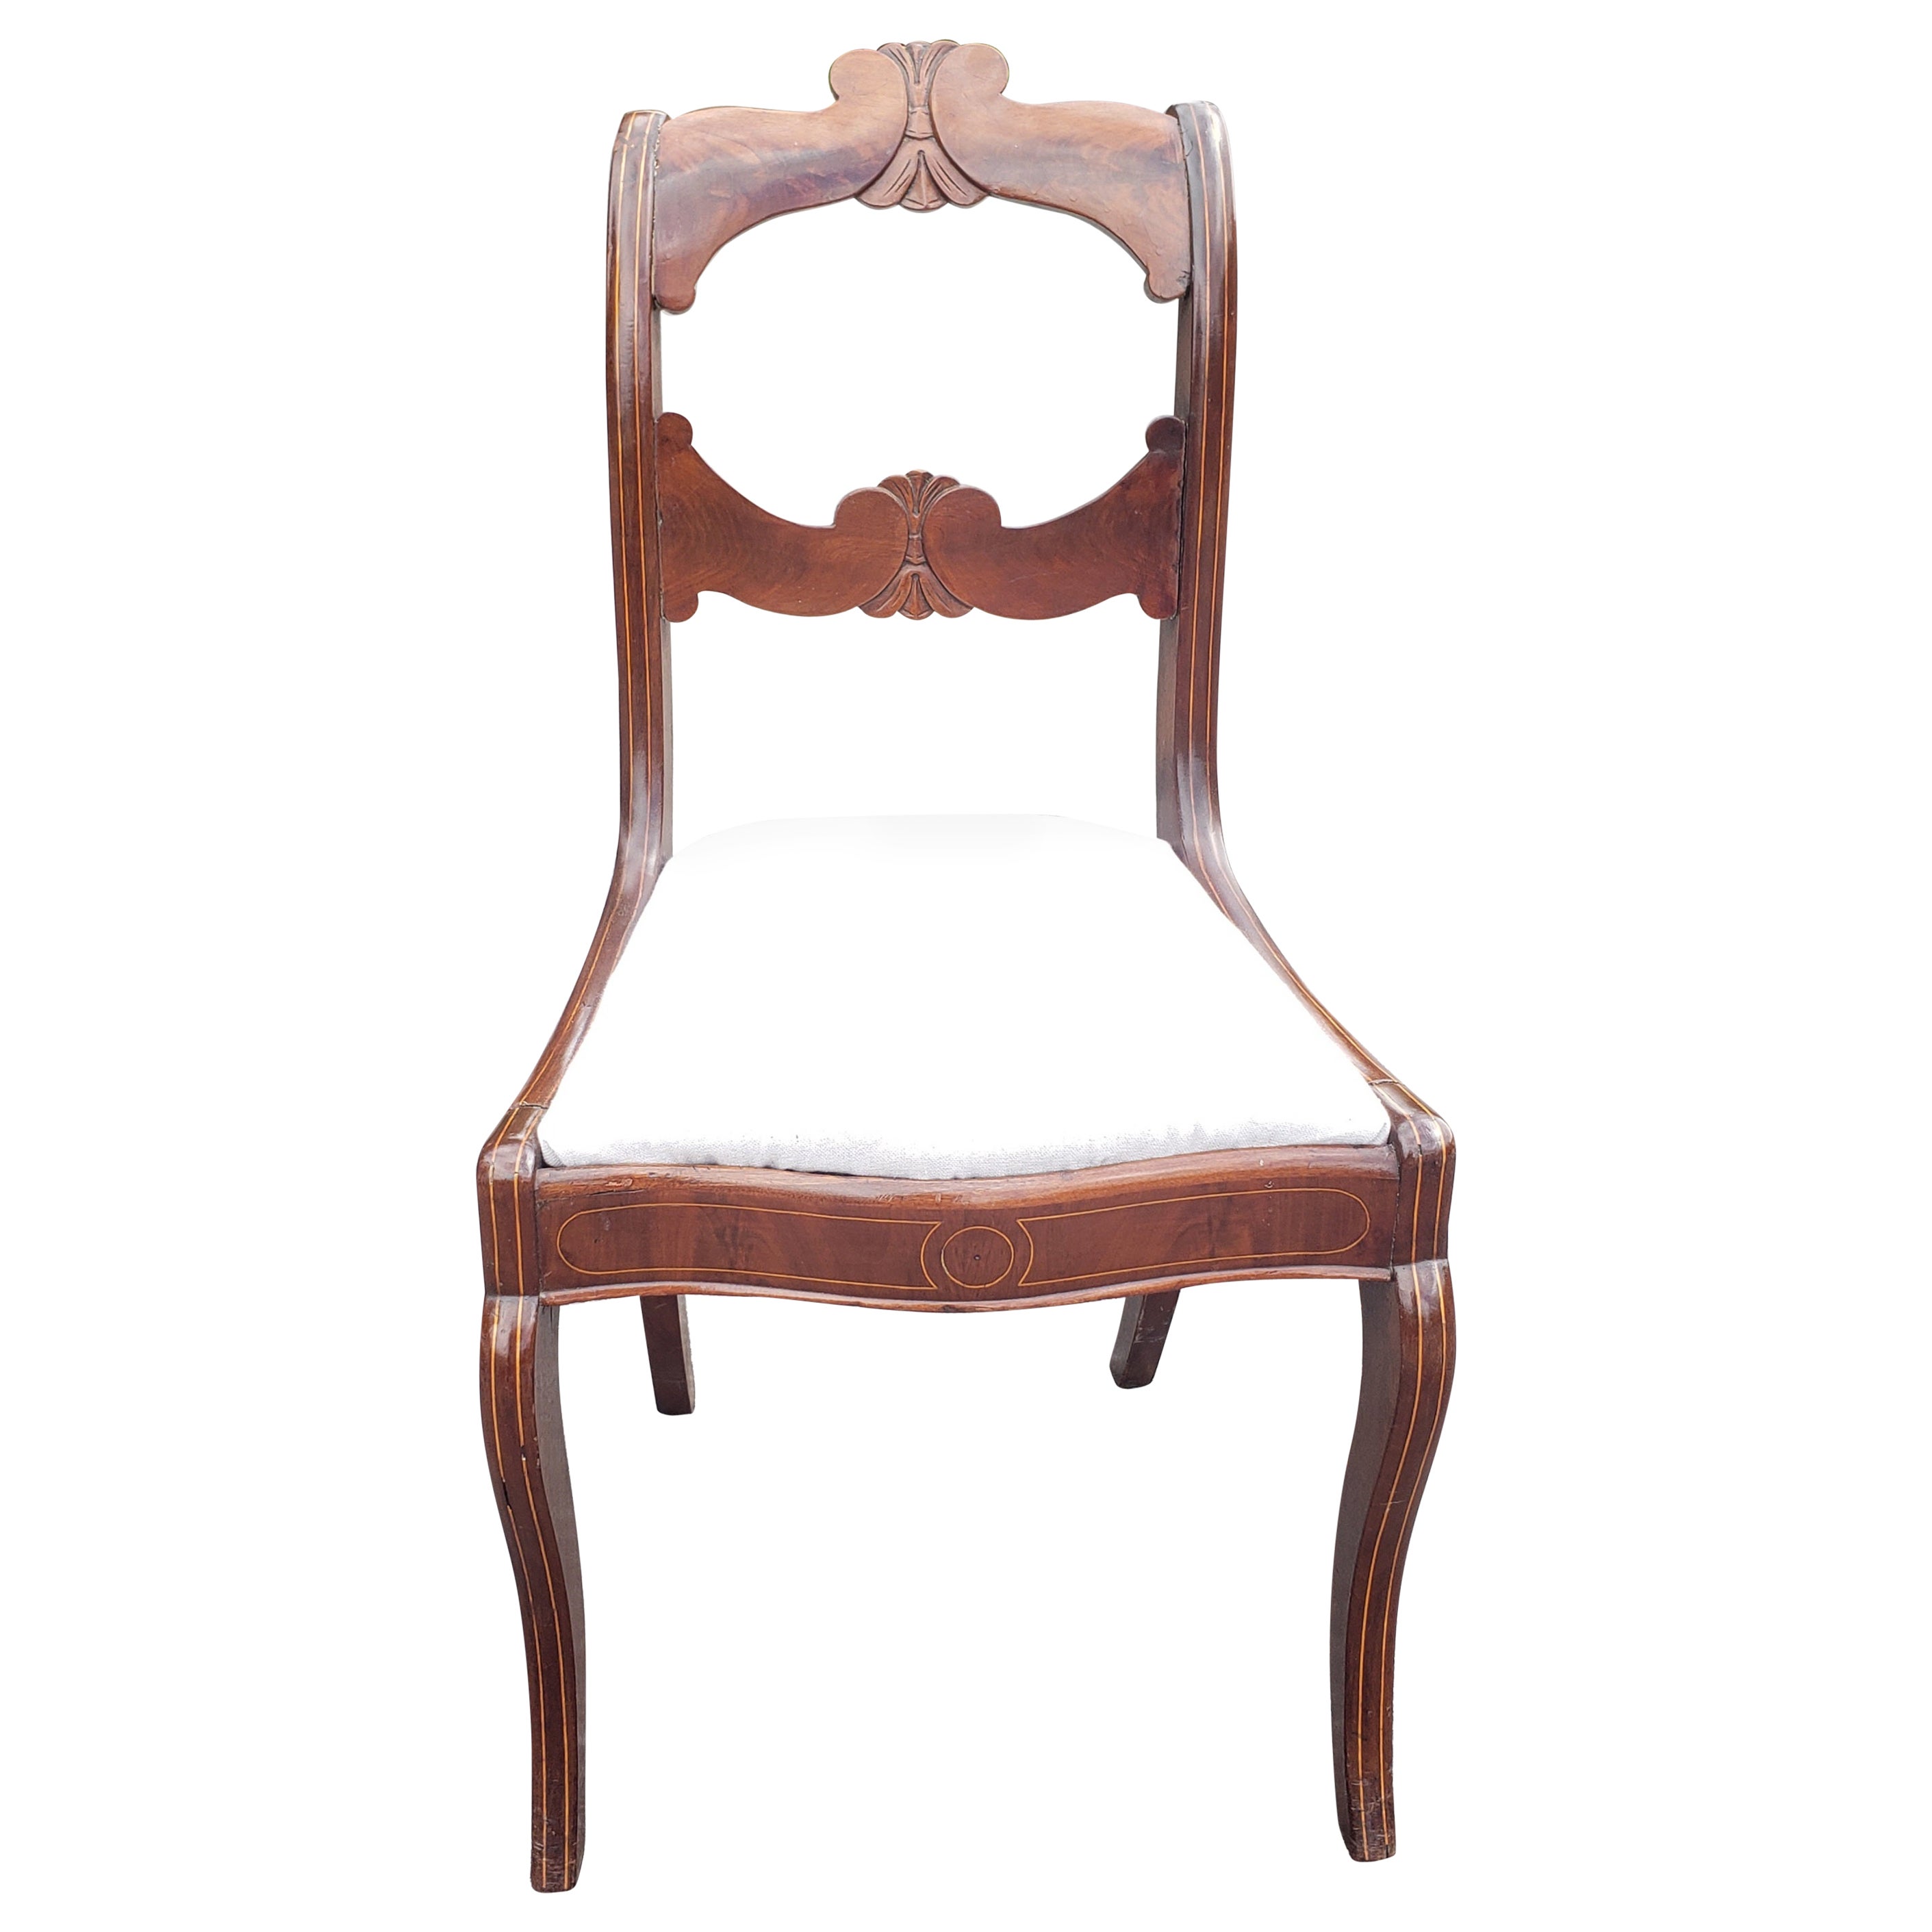 19th C. Flame Mahogany and Satinwood Inlaid with Upholstered Seat Side Chair